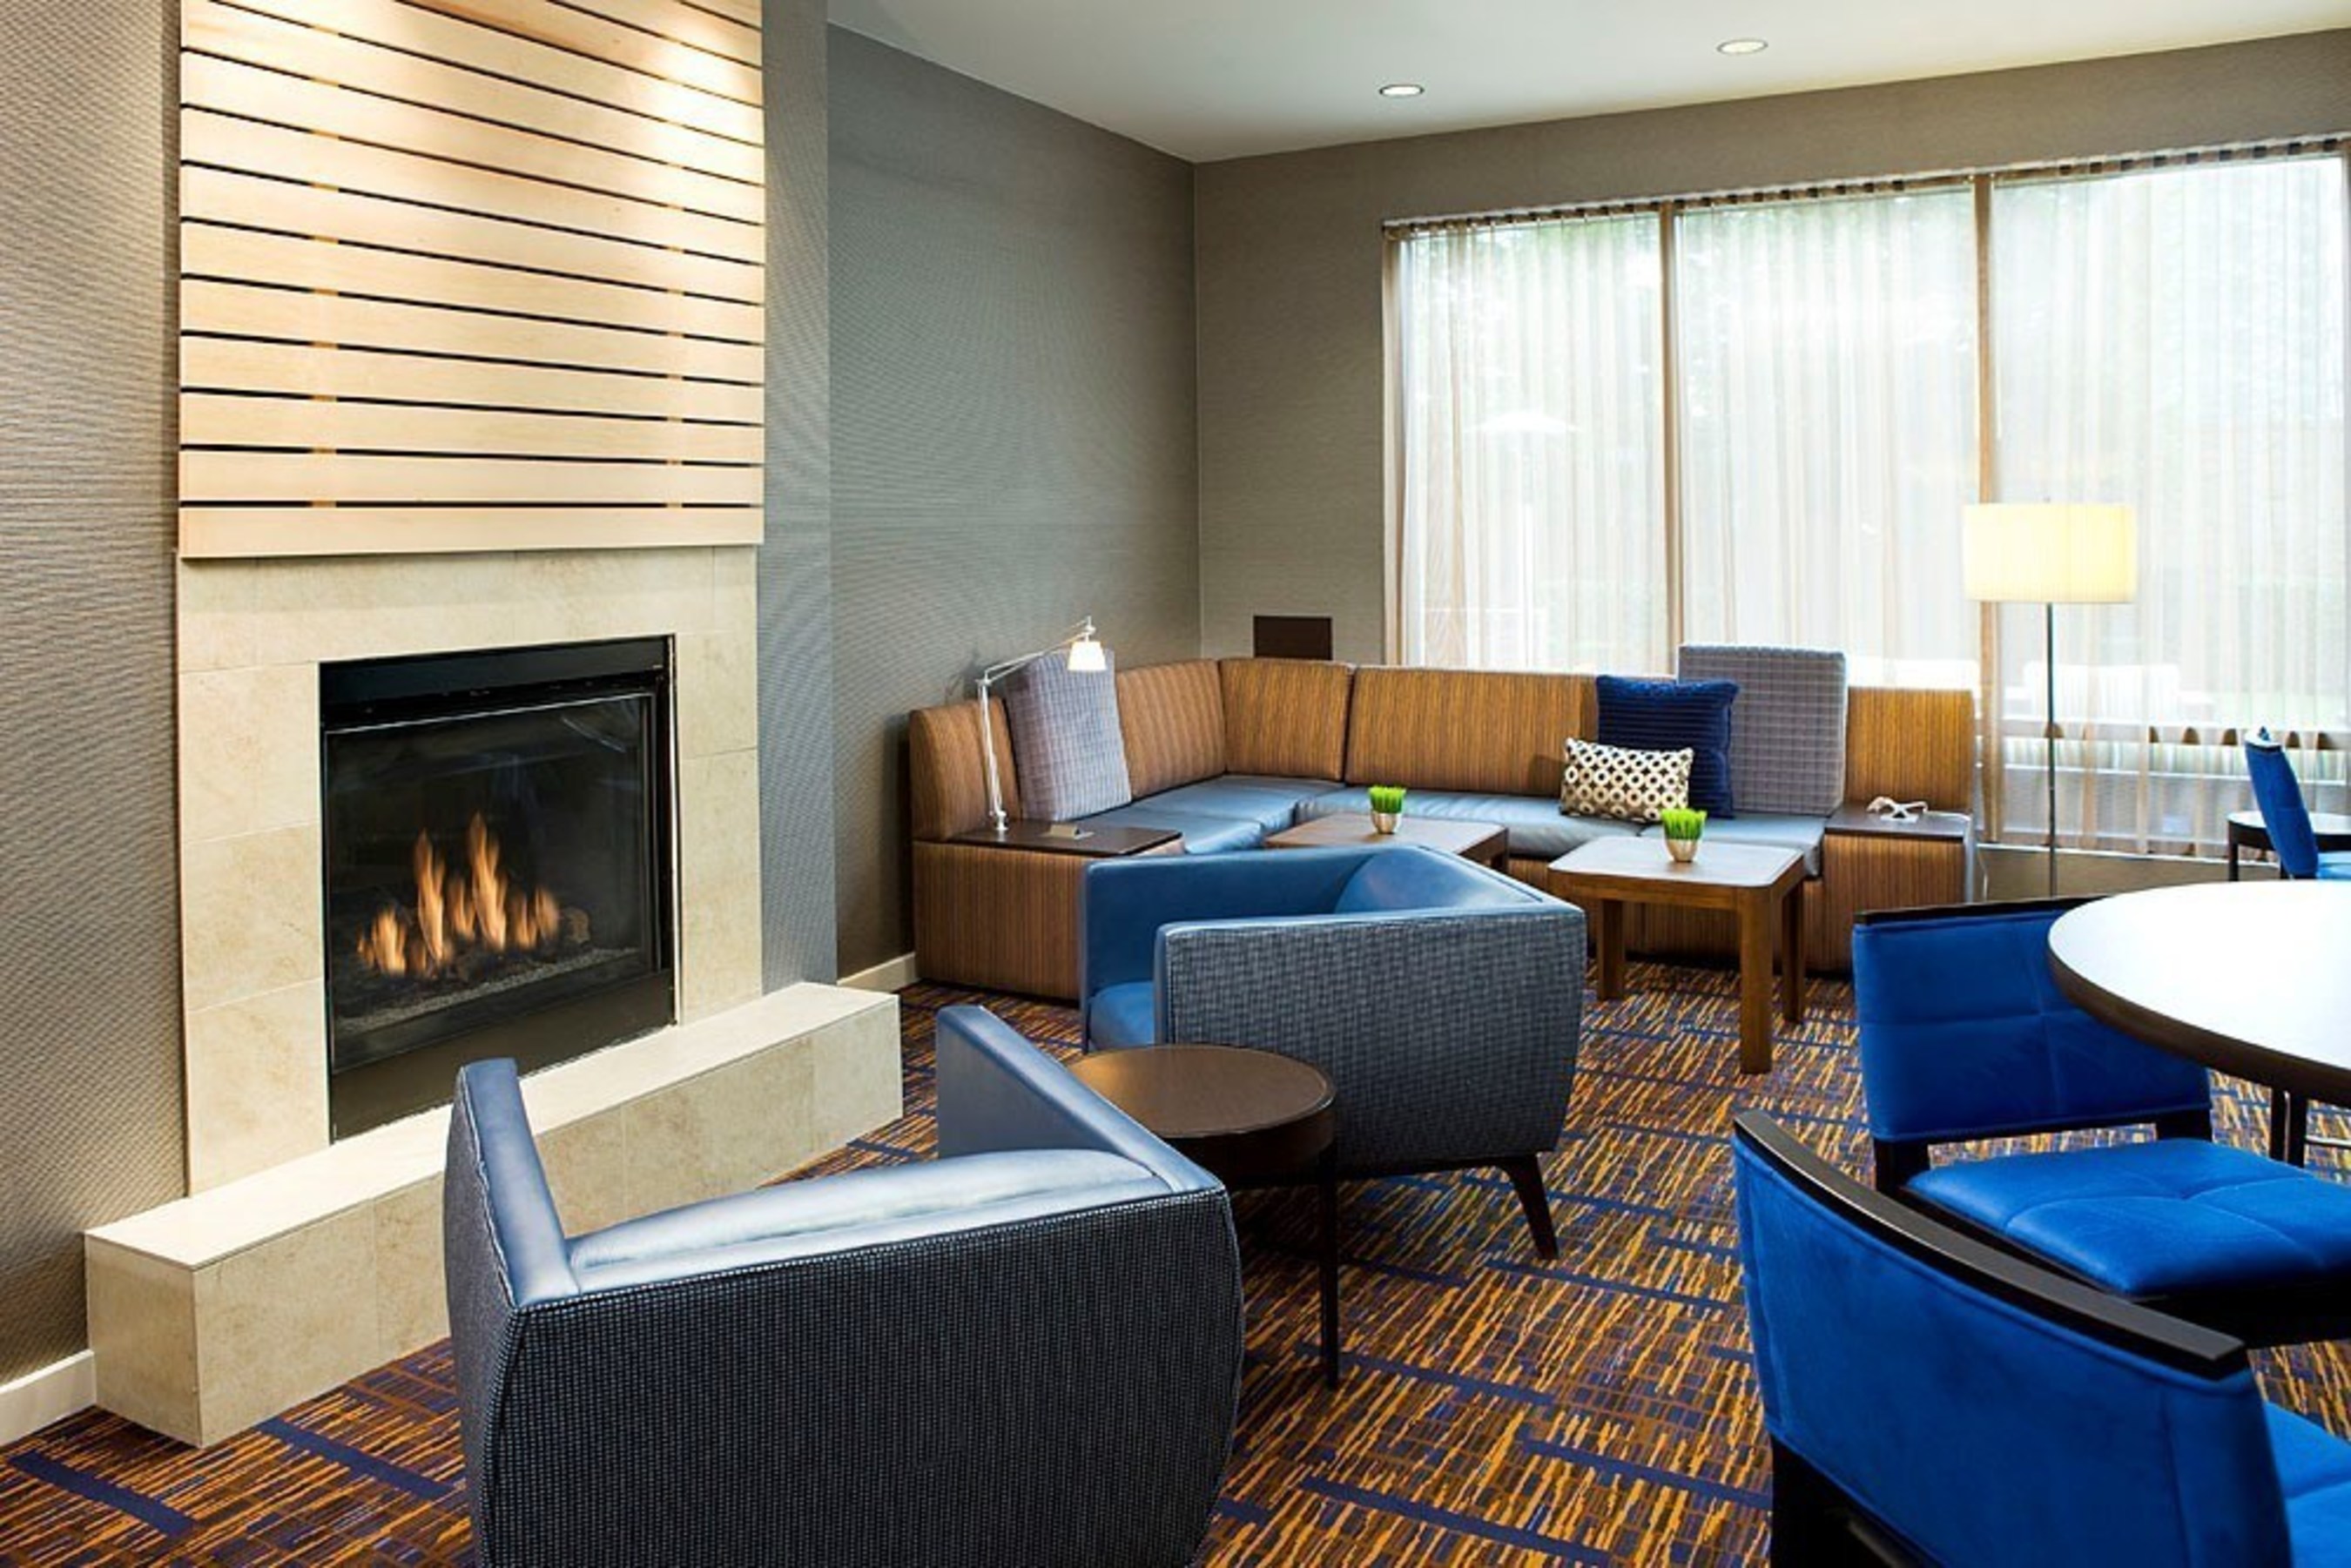 Courtyard Seattle Federal Way (pictured), SpringHill Suites Seattle South/Renton and TownePlace Suites Seattle South/Renton invite guests to take advantage of special rates through June 30, 2015, just in time for the 2015 U.S. Open. For information, contact Jenny Vasquez at 1-253-529-0200 or cy.seafw.gm@marriott.com.